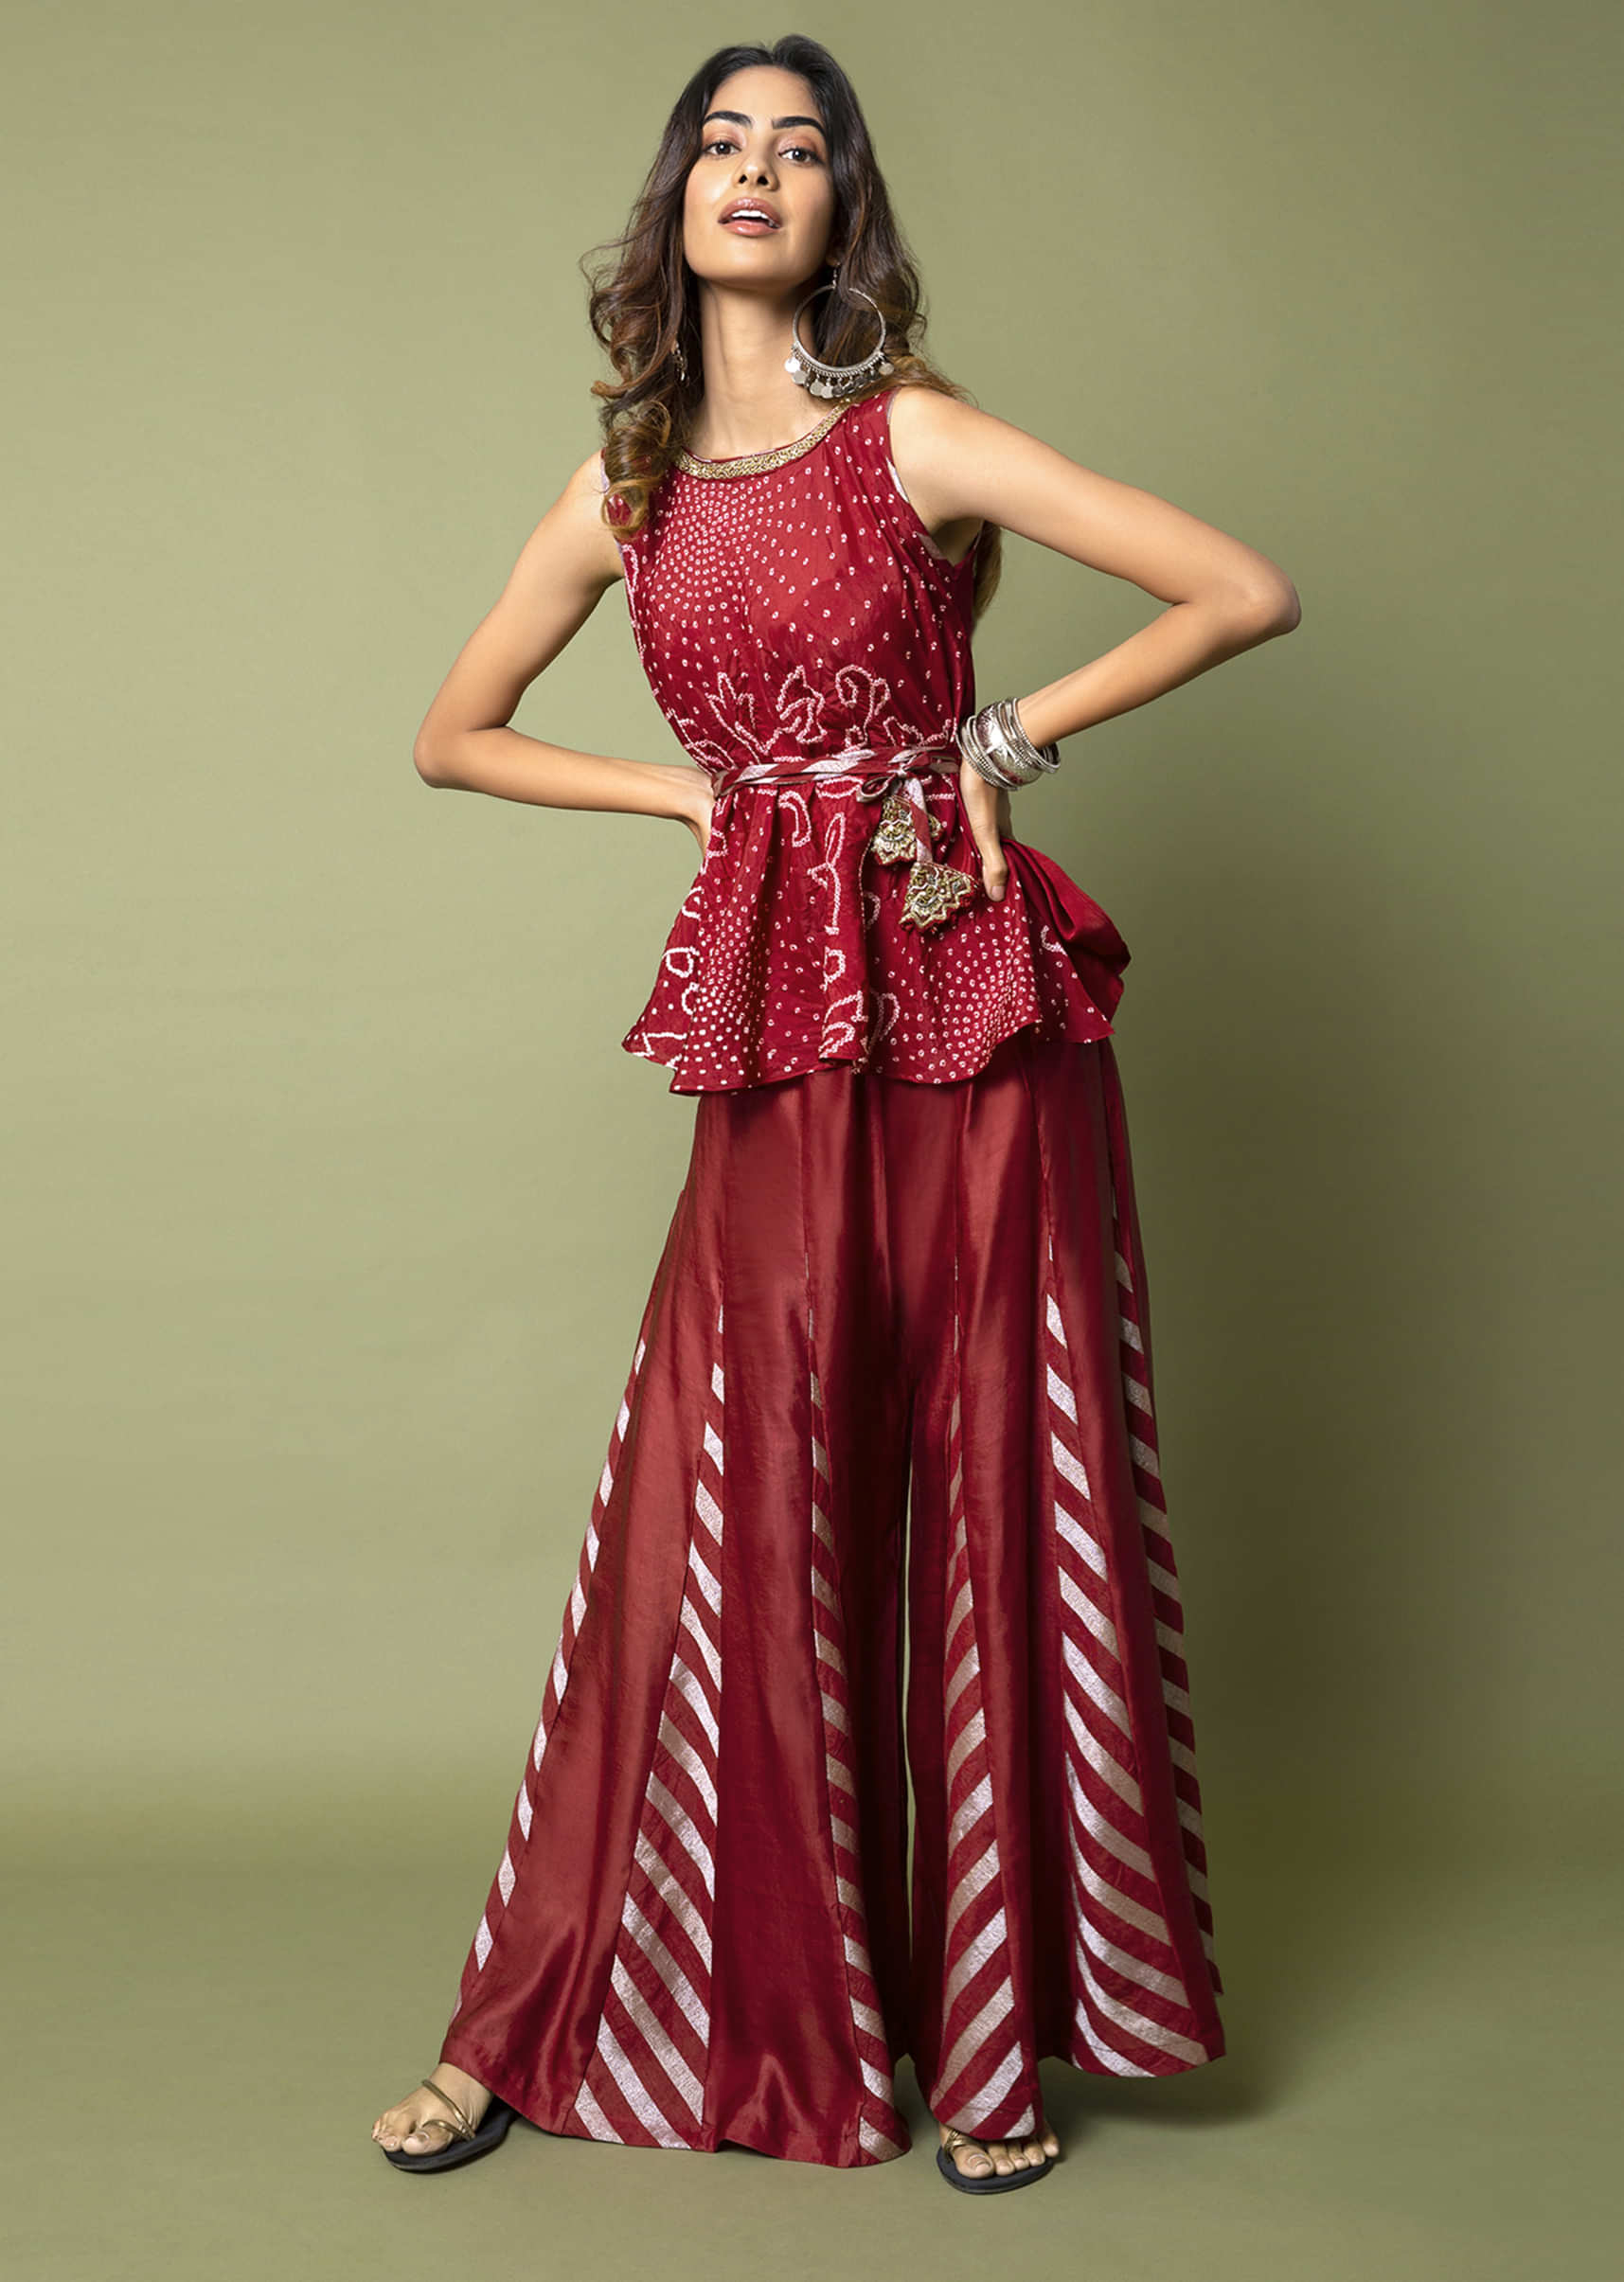 Maroon Flared Top With Bandhani And Antique Gold Hand Embroidery Paired With Zari Striped Paneled Sharara Pants  